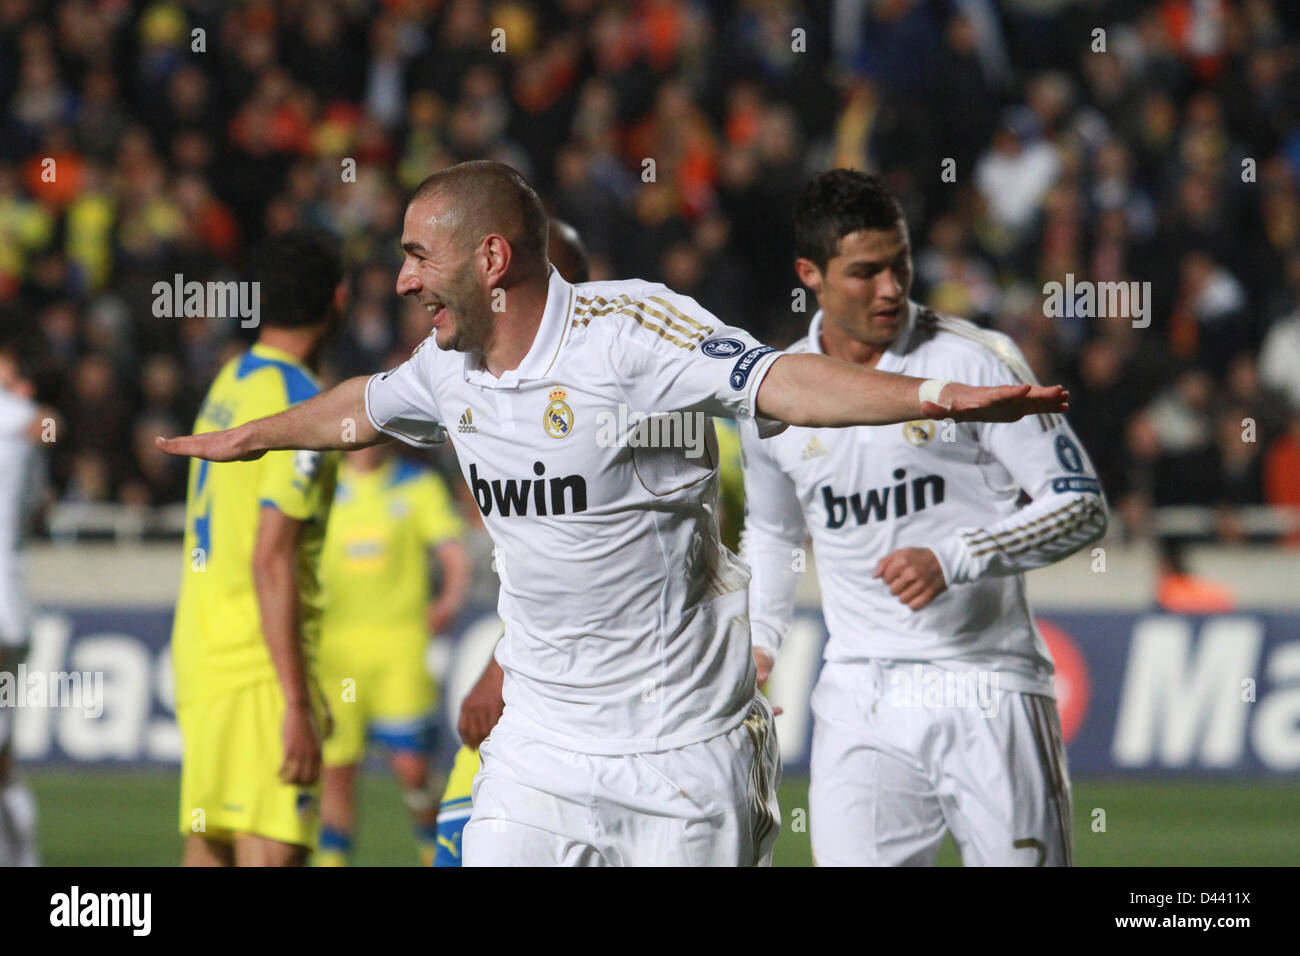 NICOSIA,CYPRUS - MARCH 27: Karim Benzema of Real Madrid during the UEFA Champions League quarter-final match between APOEL and R Stock Photo